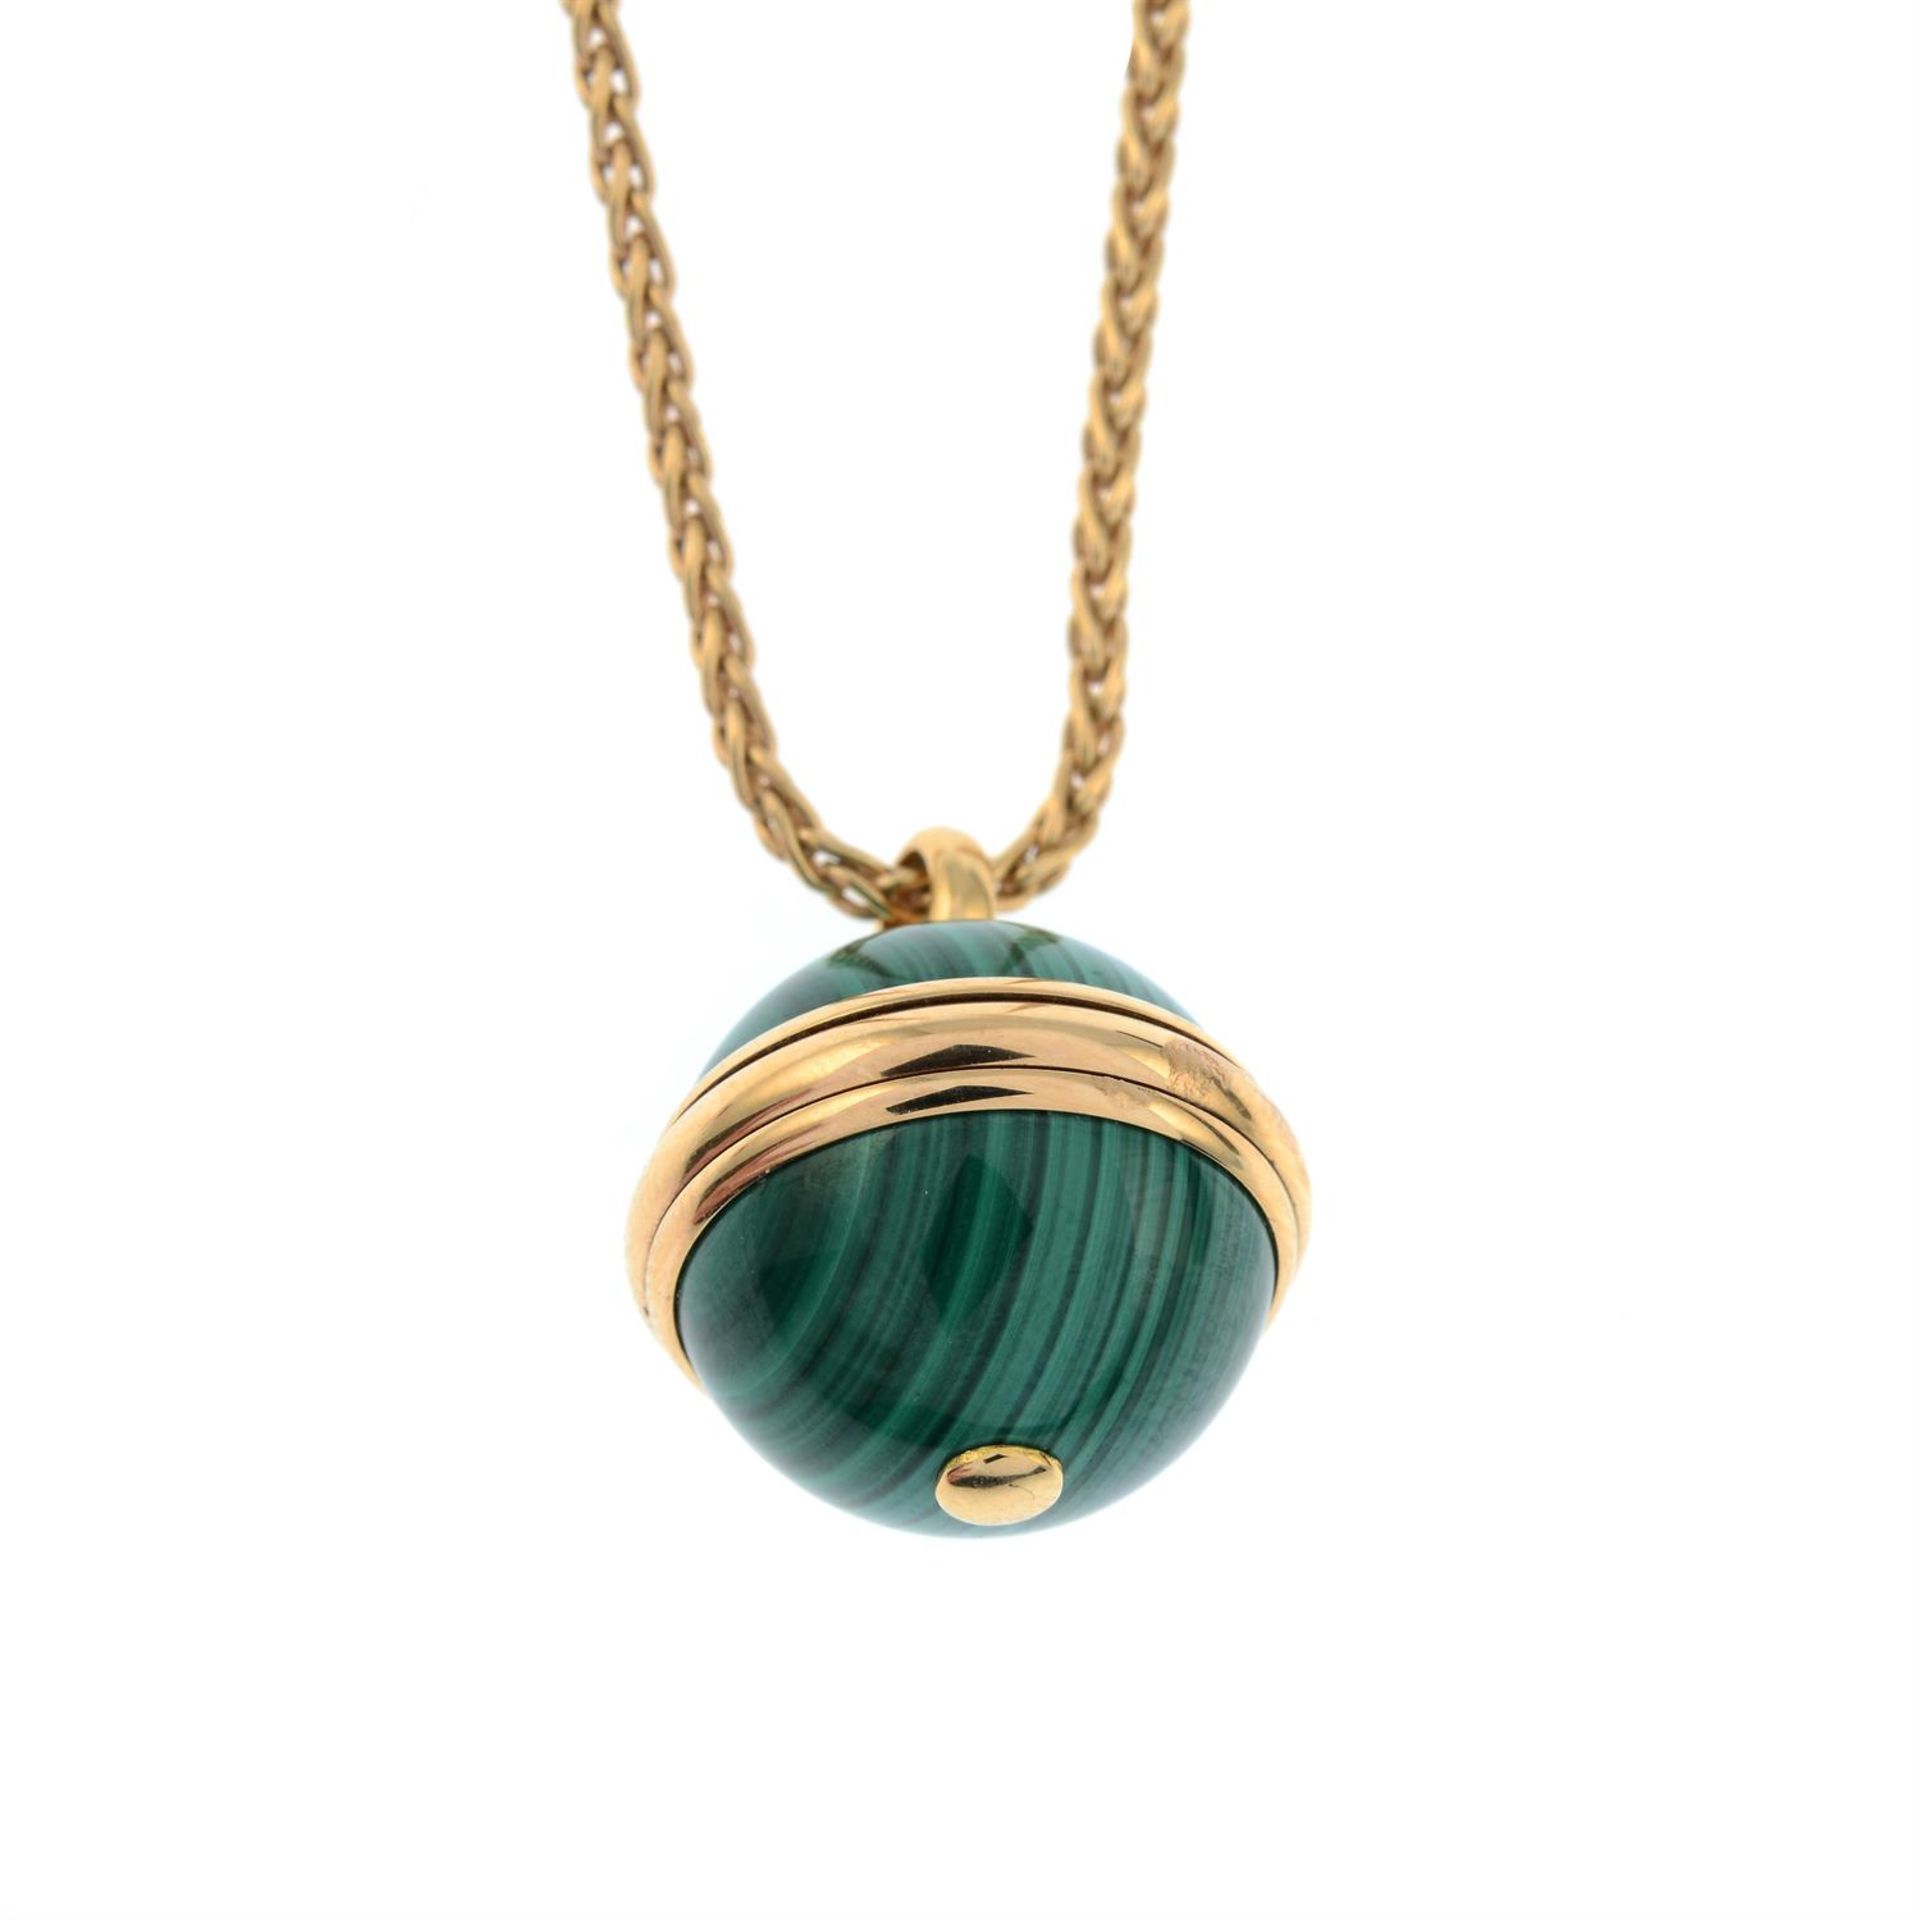 A malachite and diamond 'Posession' pendant, on chain, by Piaget. - Image 3 of 6